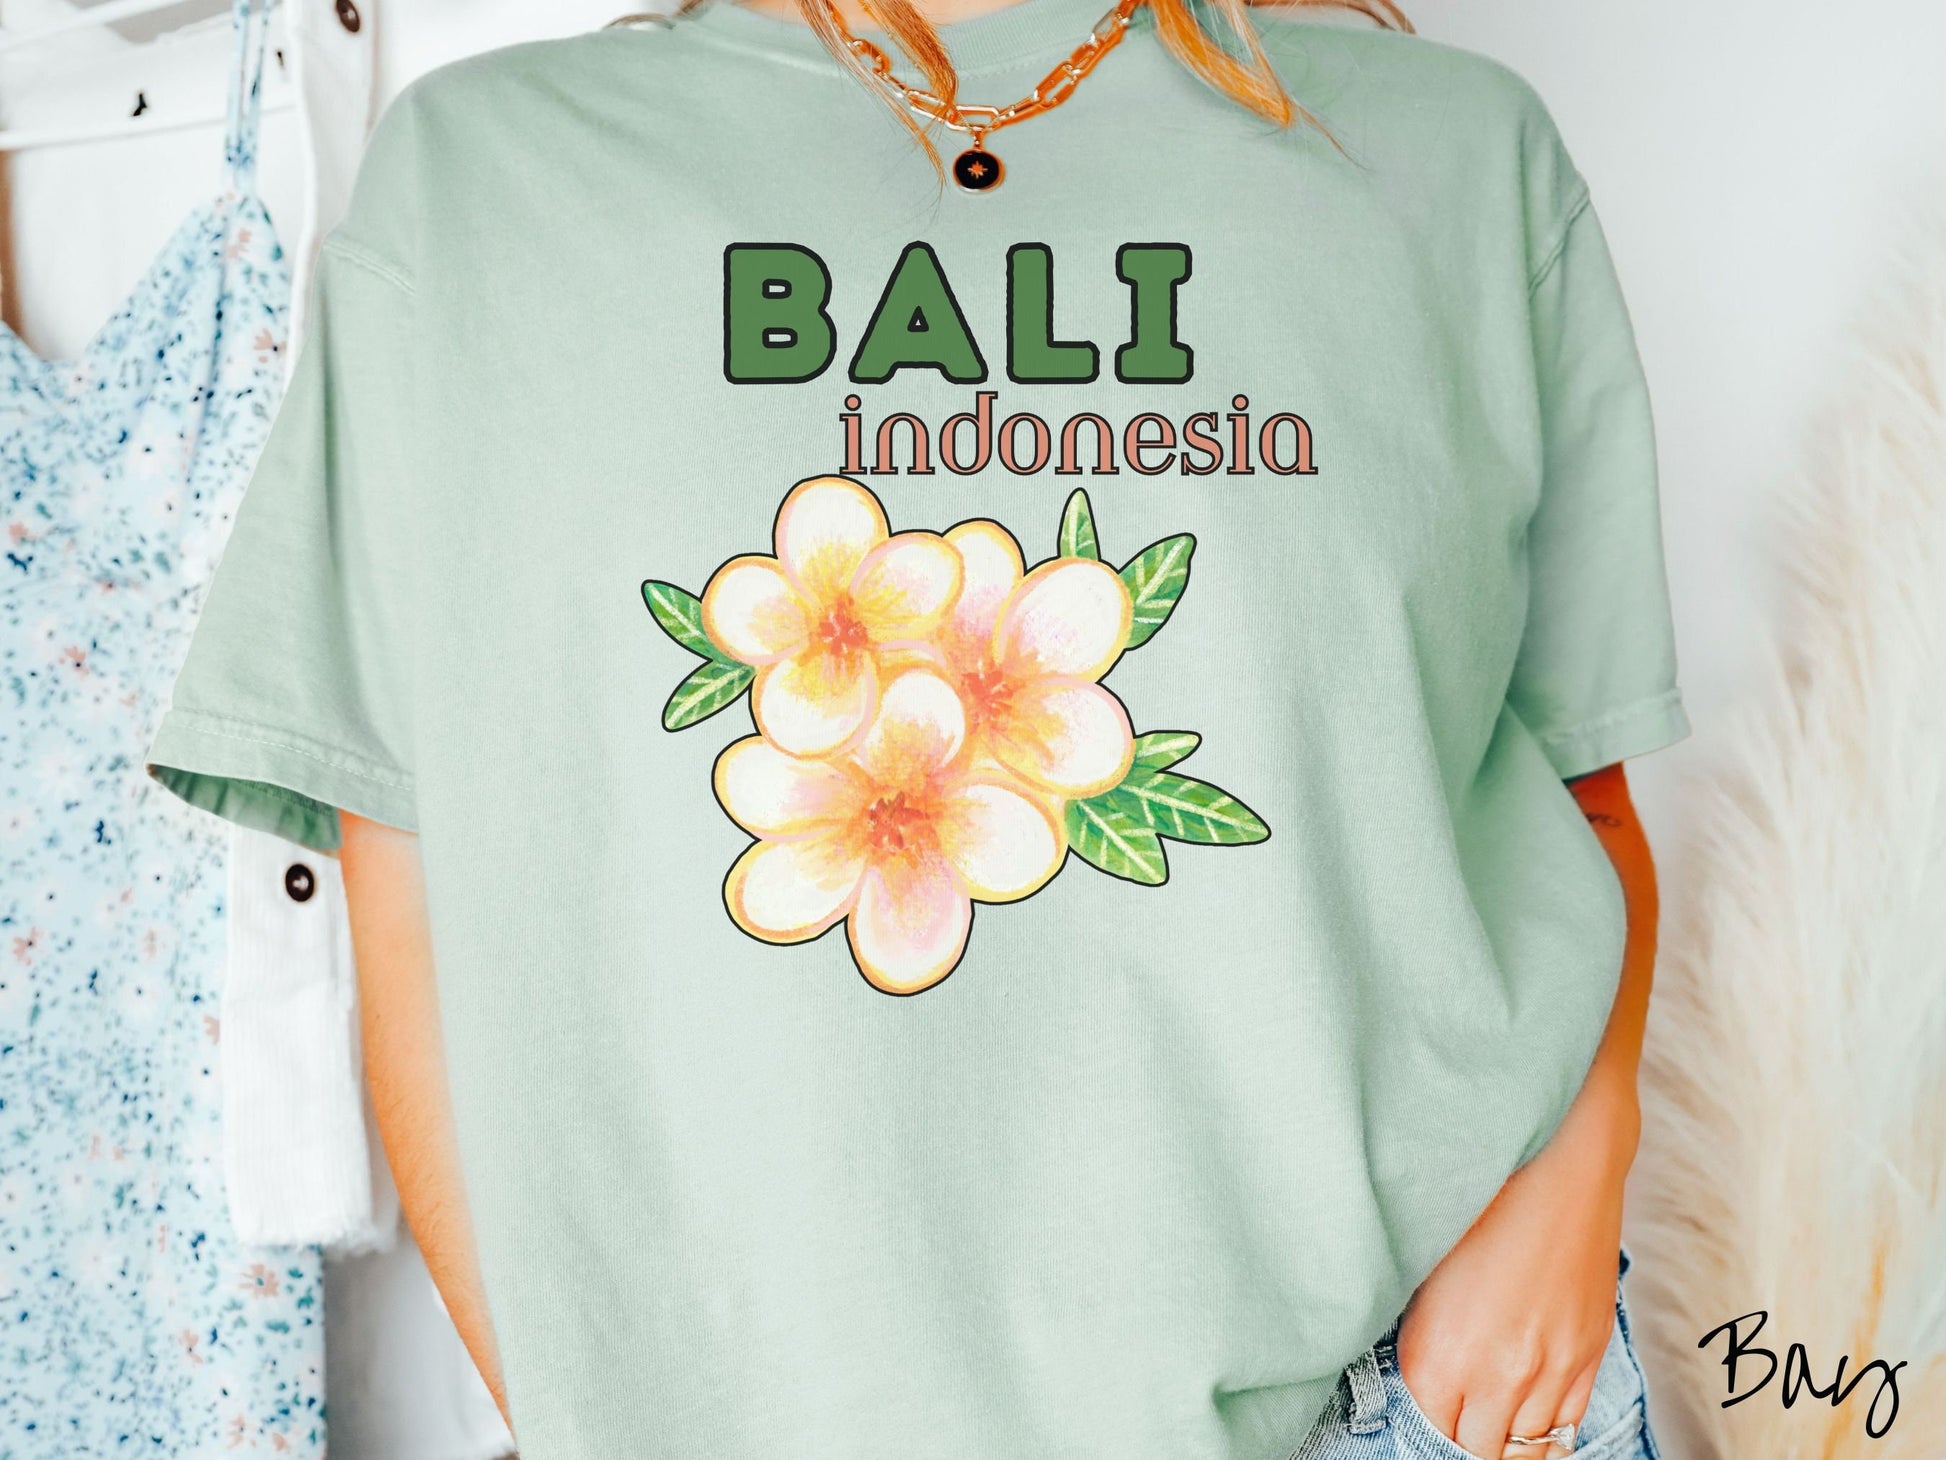 A woman wearing a vintage, bay colored shirt with the text Bali Indonesia in green and yellow font, respectively, and a picture underneath of three beautiful yellow and orange flowers with green leaves.